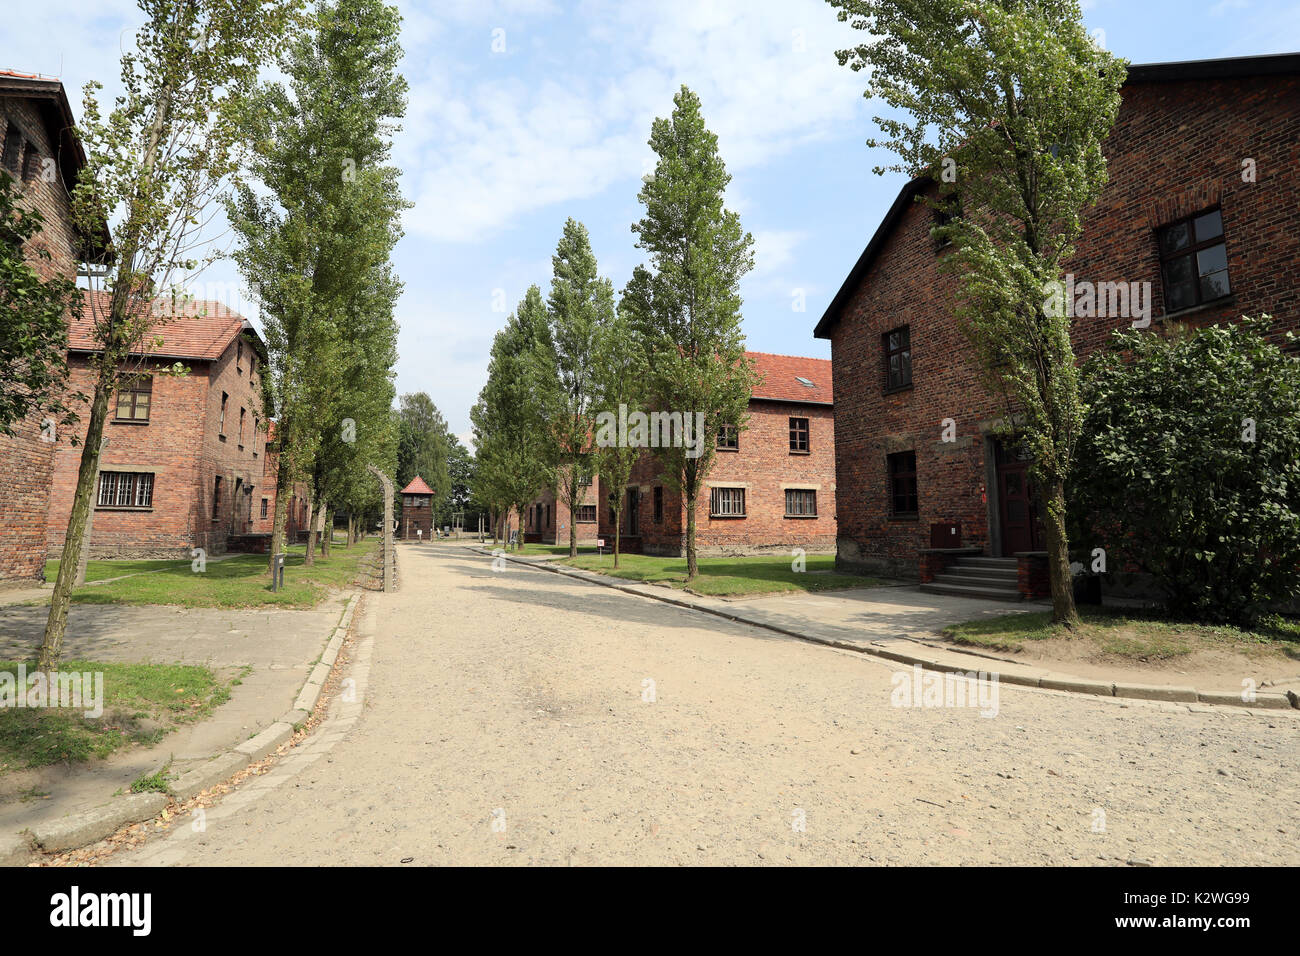 Buildings in the Nazi concentration camp of Auschwitz, close to the town of Oświęcim, Poland, photographed on 25 August 2017. Stock Photo